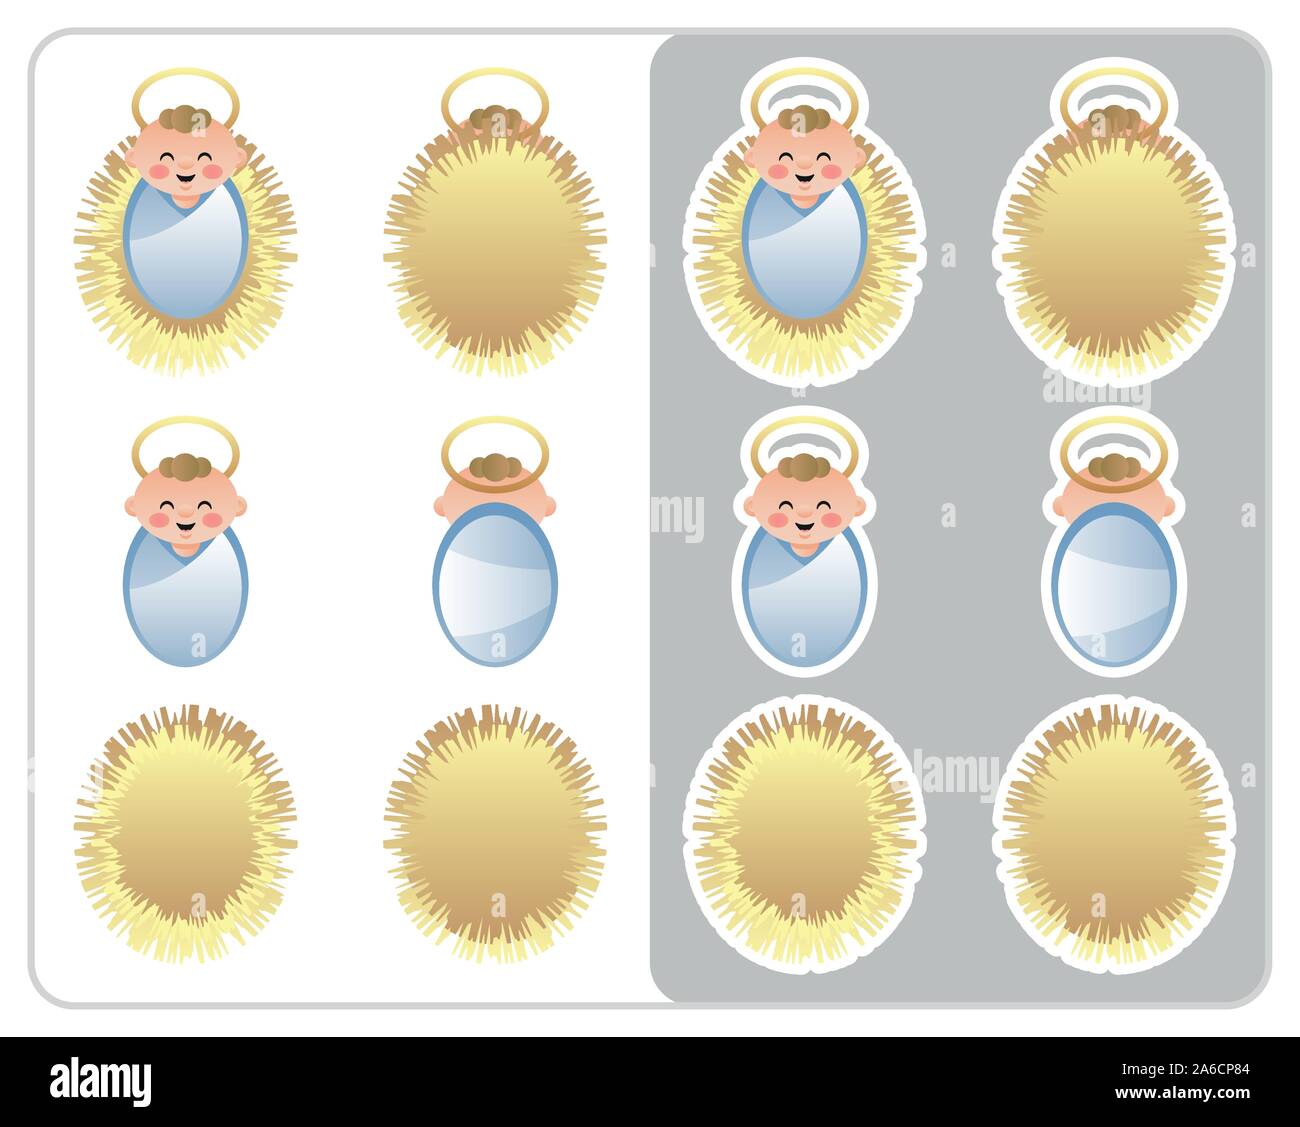 Two Sided Nativity icon and sticker of the Baby Jesus and the Crib. Cute cartoon character. Vector illustration without transparency. Stock Vector